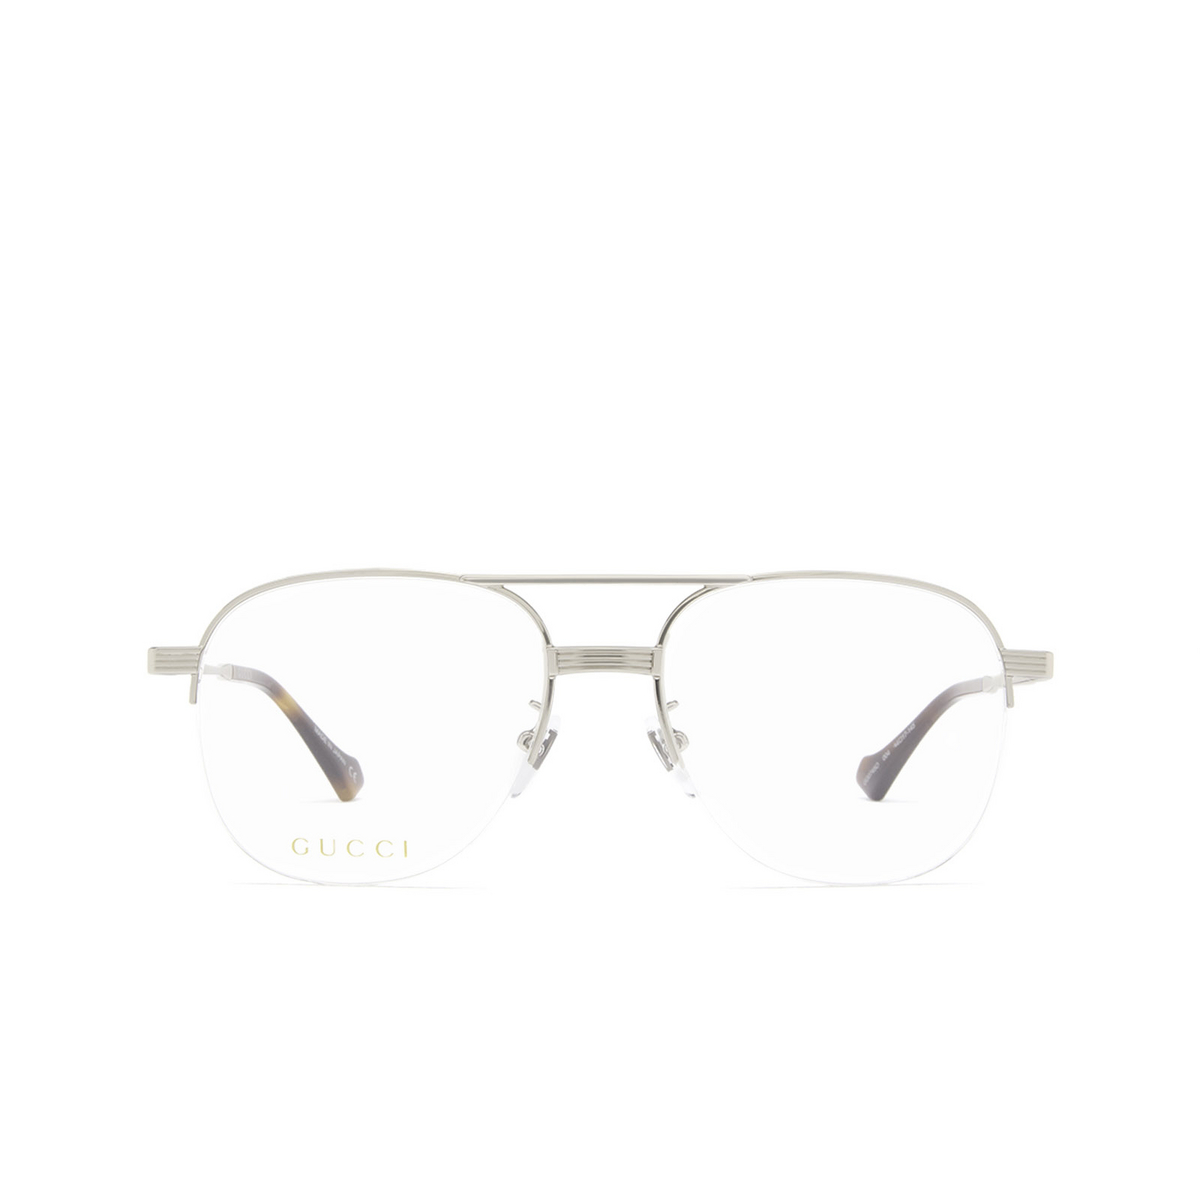 Gucci® Aviator Eyeglasses: GG0745O color 004 Silver - front view